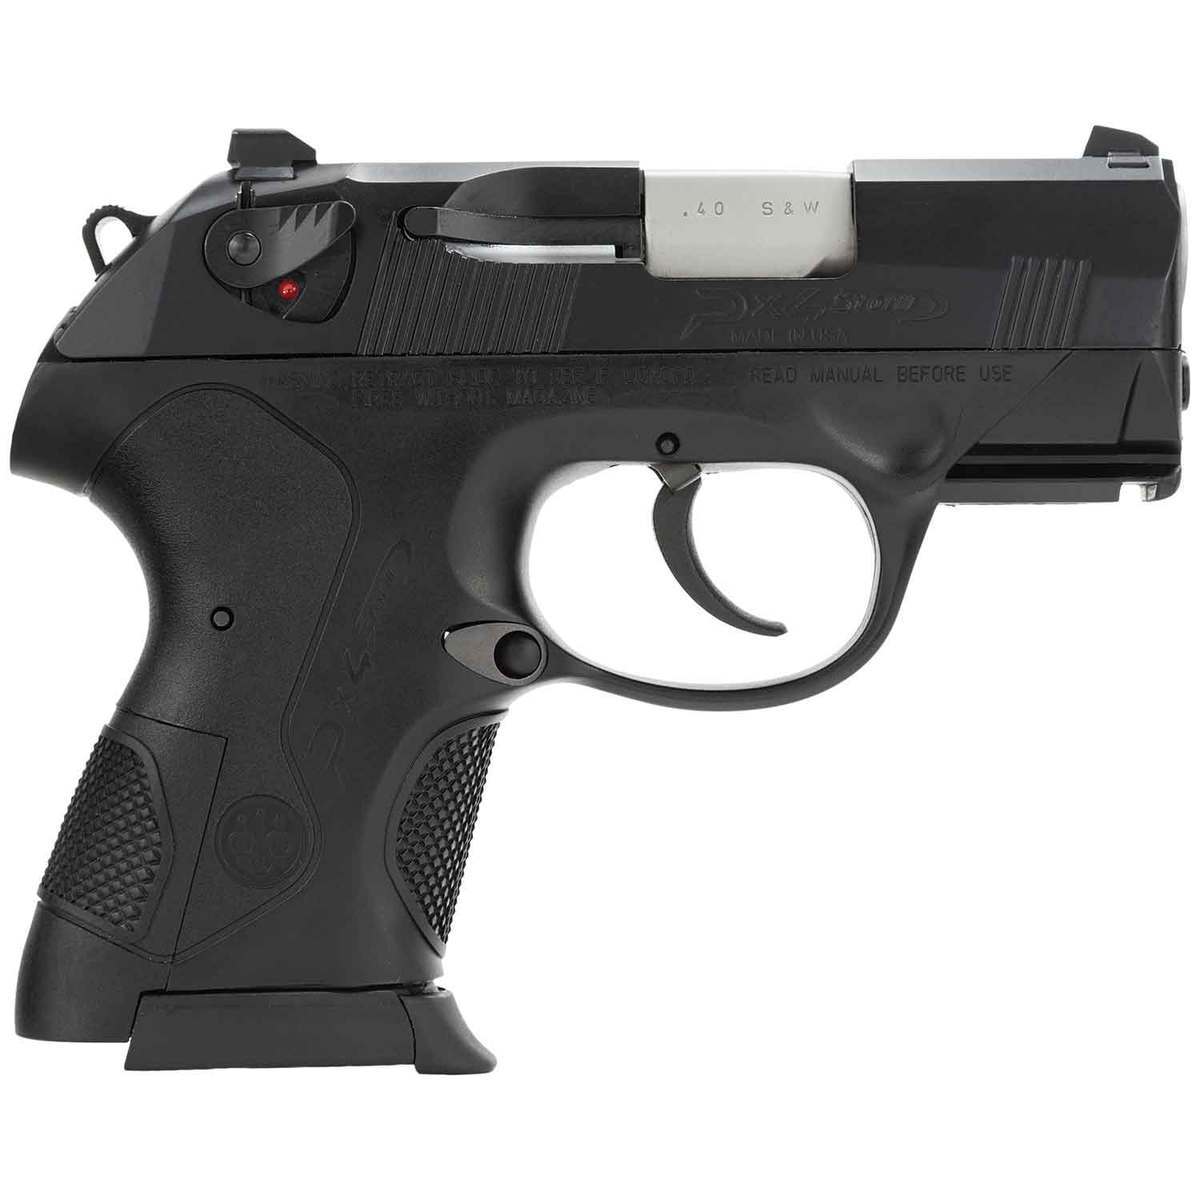 beretta-px4-storm-sub-compact-40-s-w-3in-black-pistol-10-1-rounds